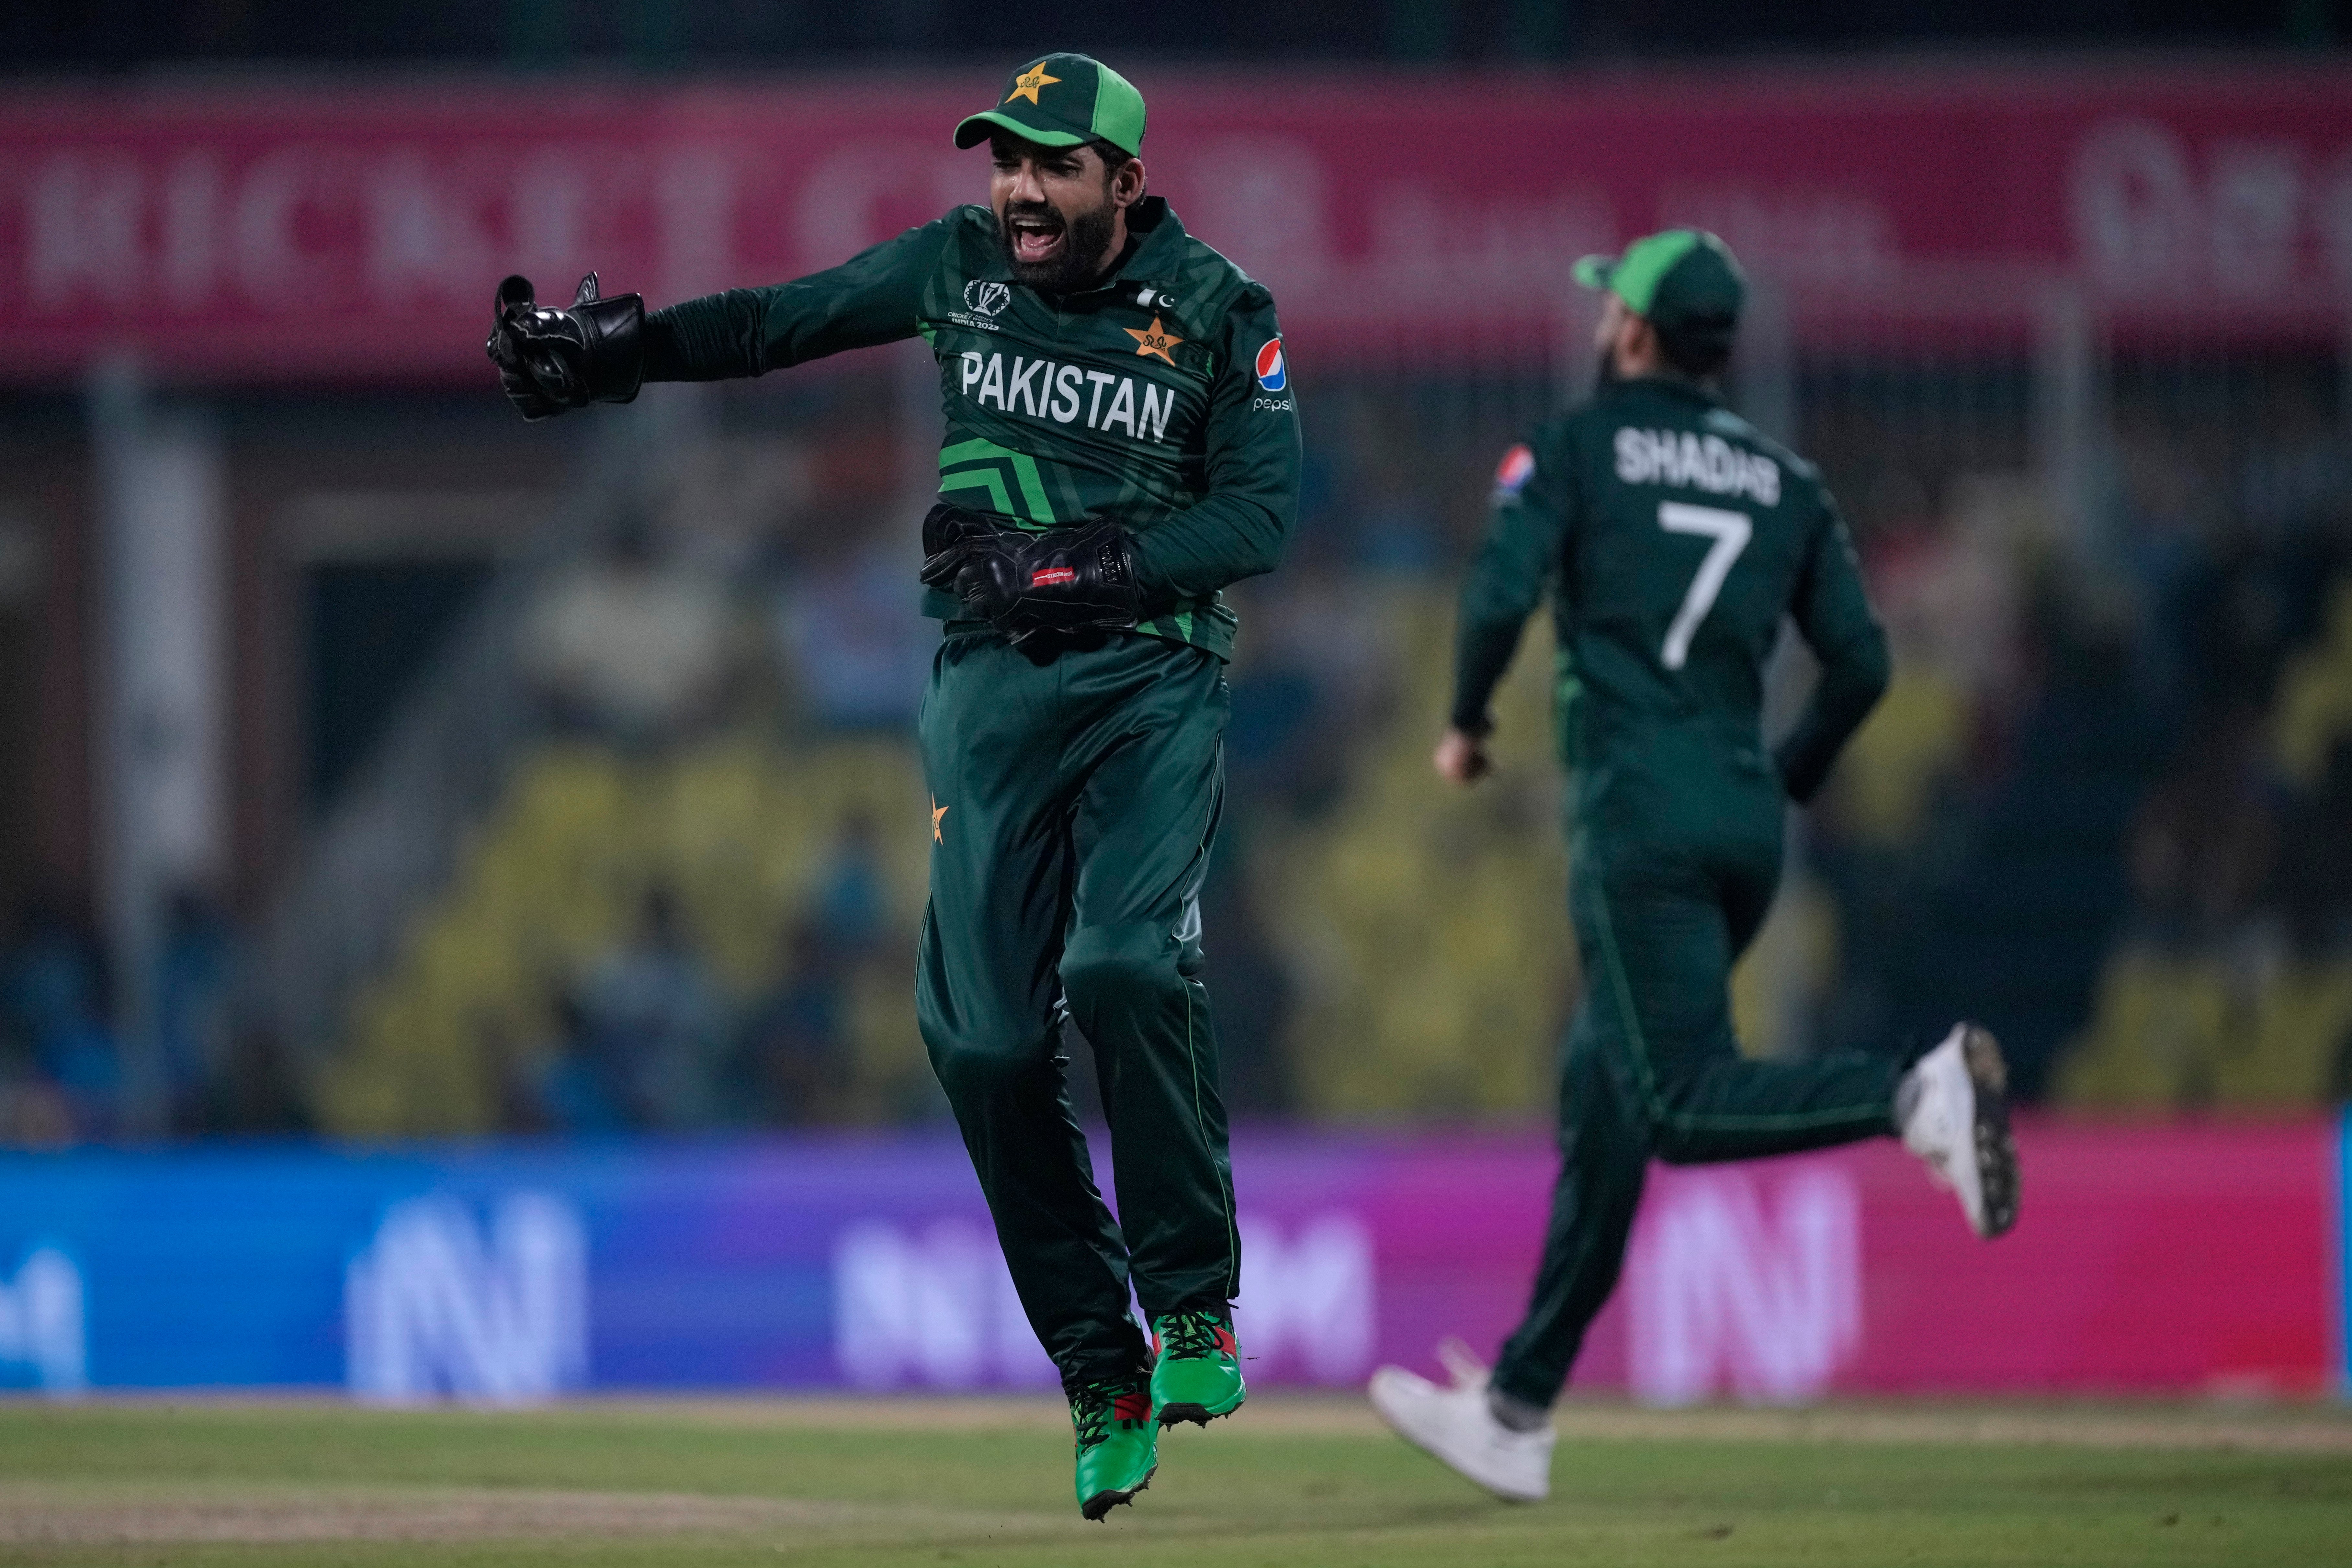 Mohammad Rizwan emulated Alex Carey’s action against Jonny Bairstow in Cricket World Cup